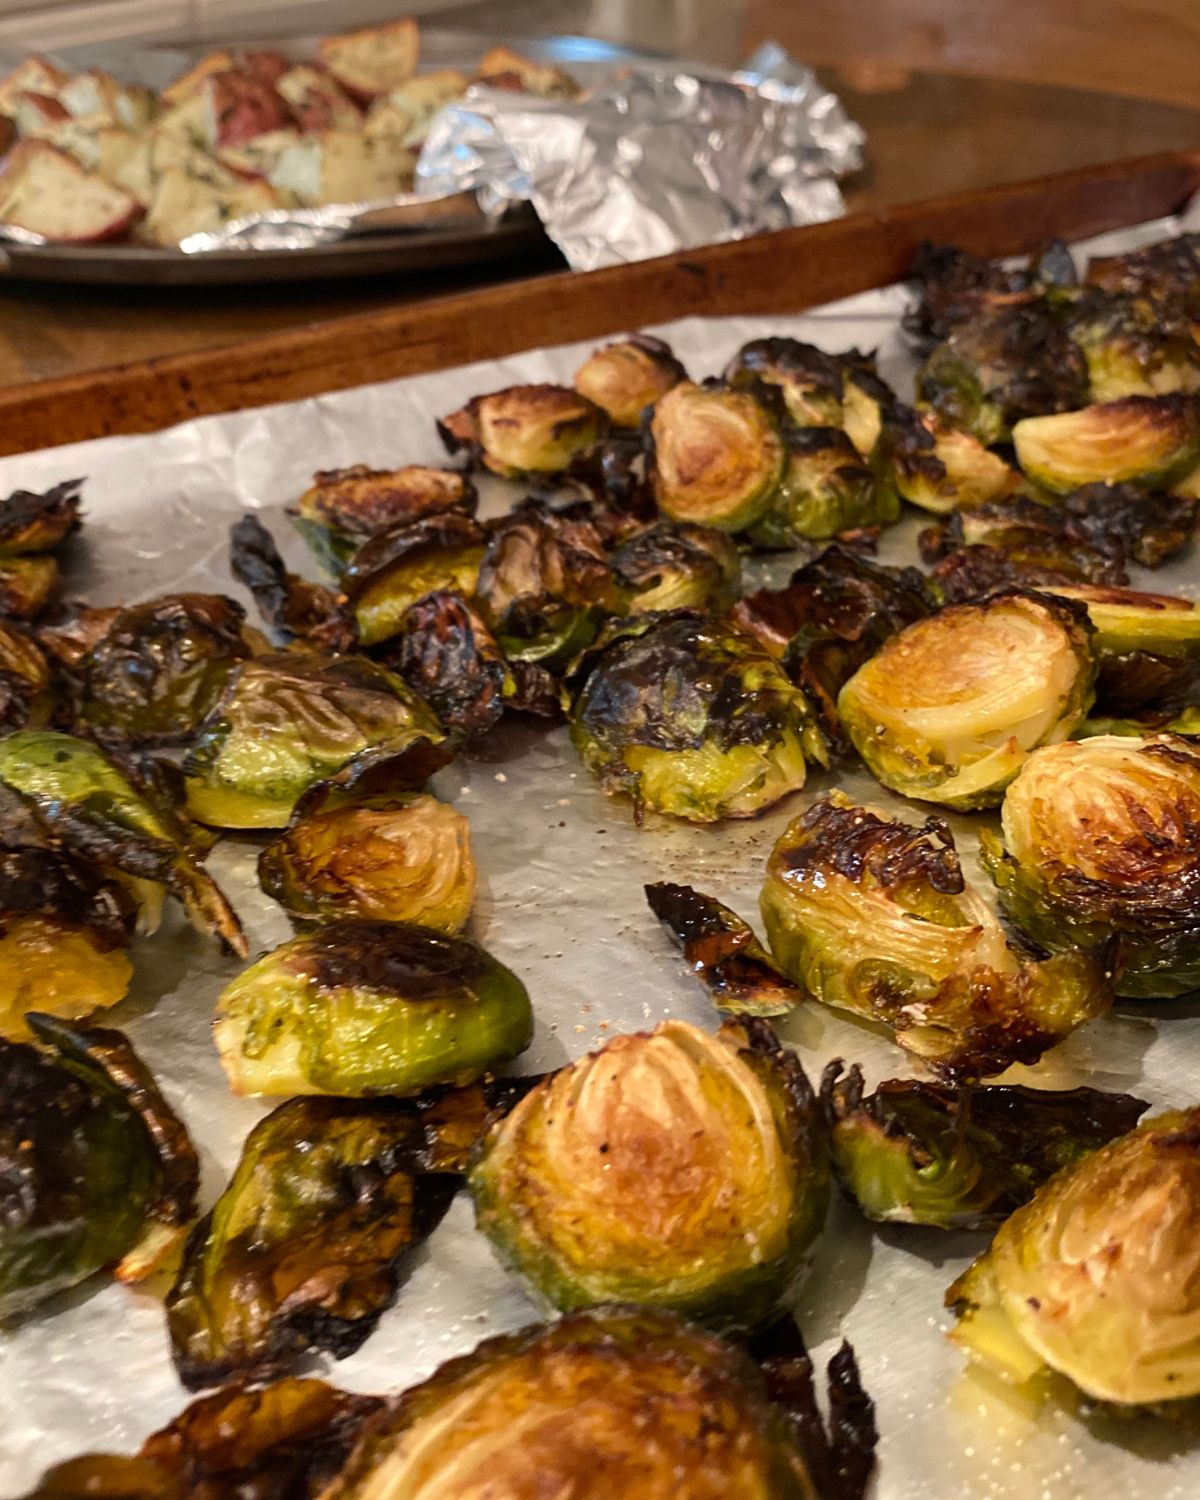 Finished brussels sprouts.